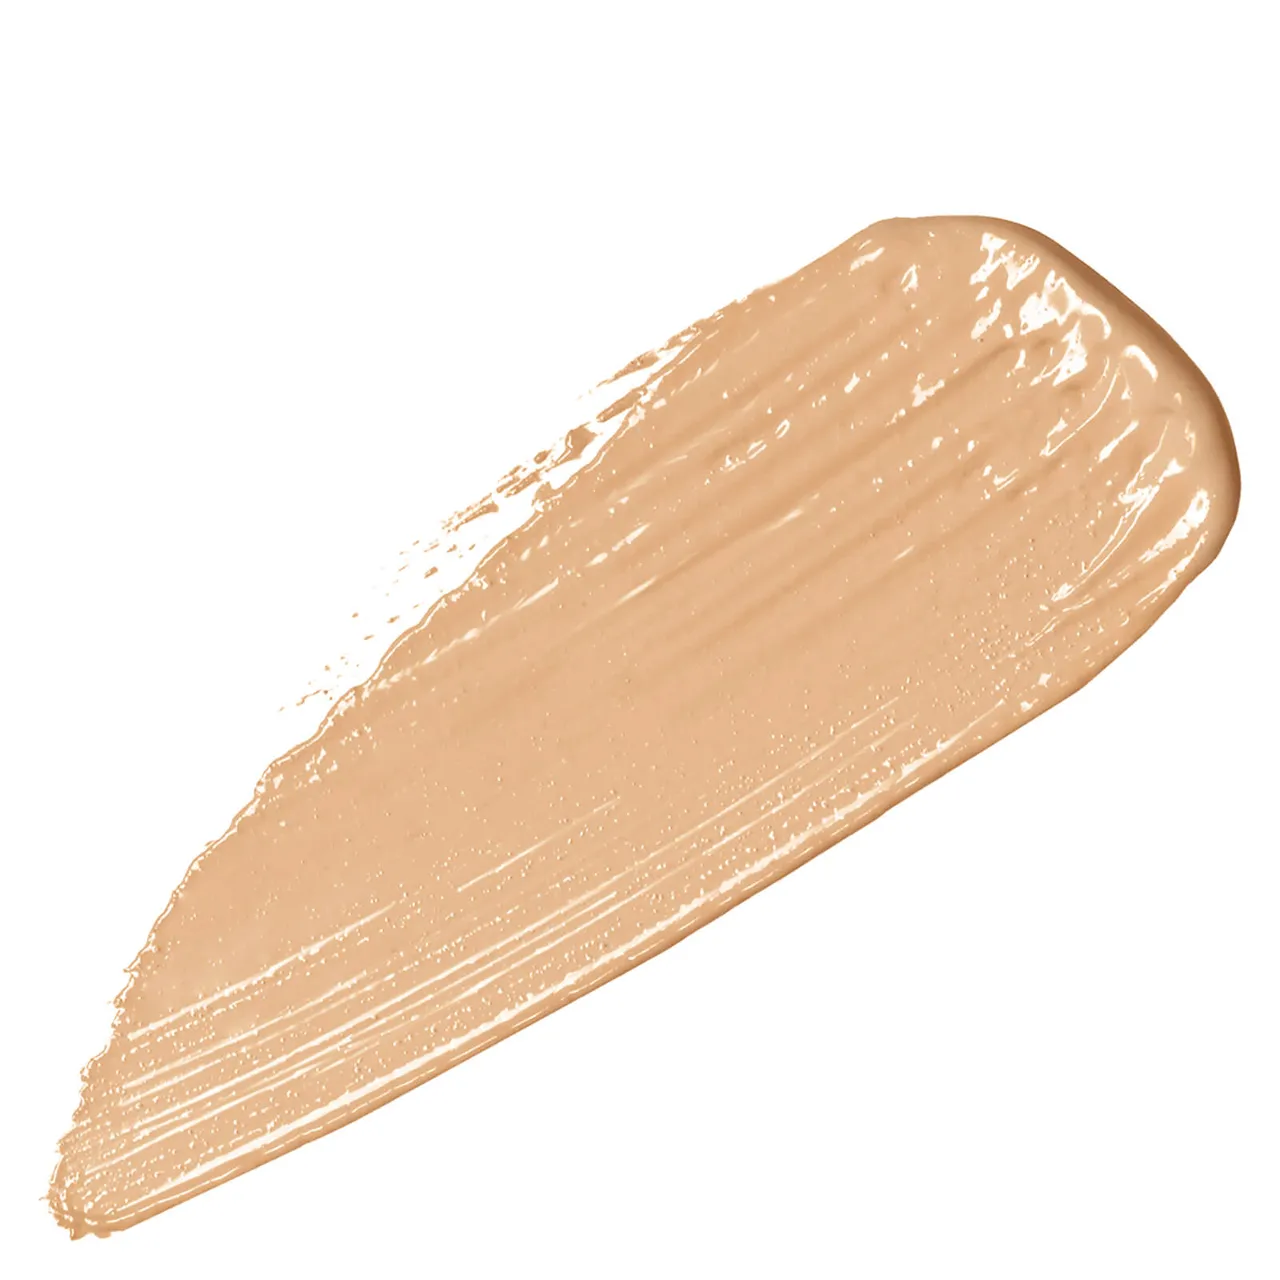 NARS Cosmetics Radiant Creamy Concealer (Various Shades) - Cafe Con Leche